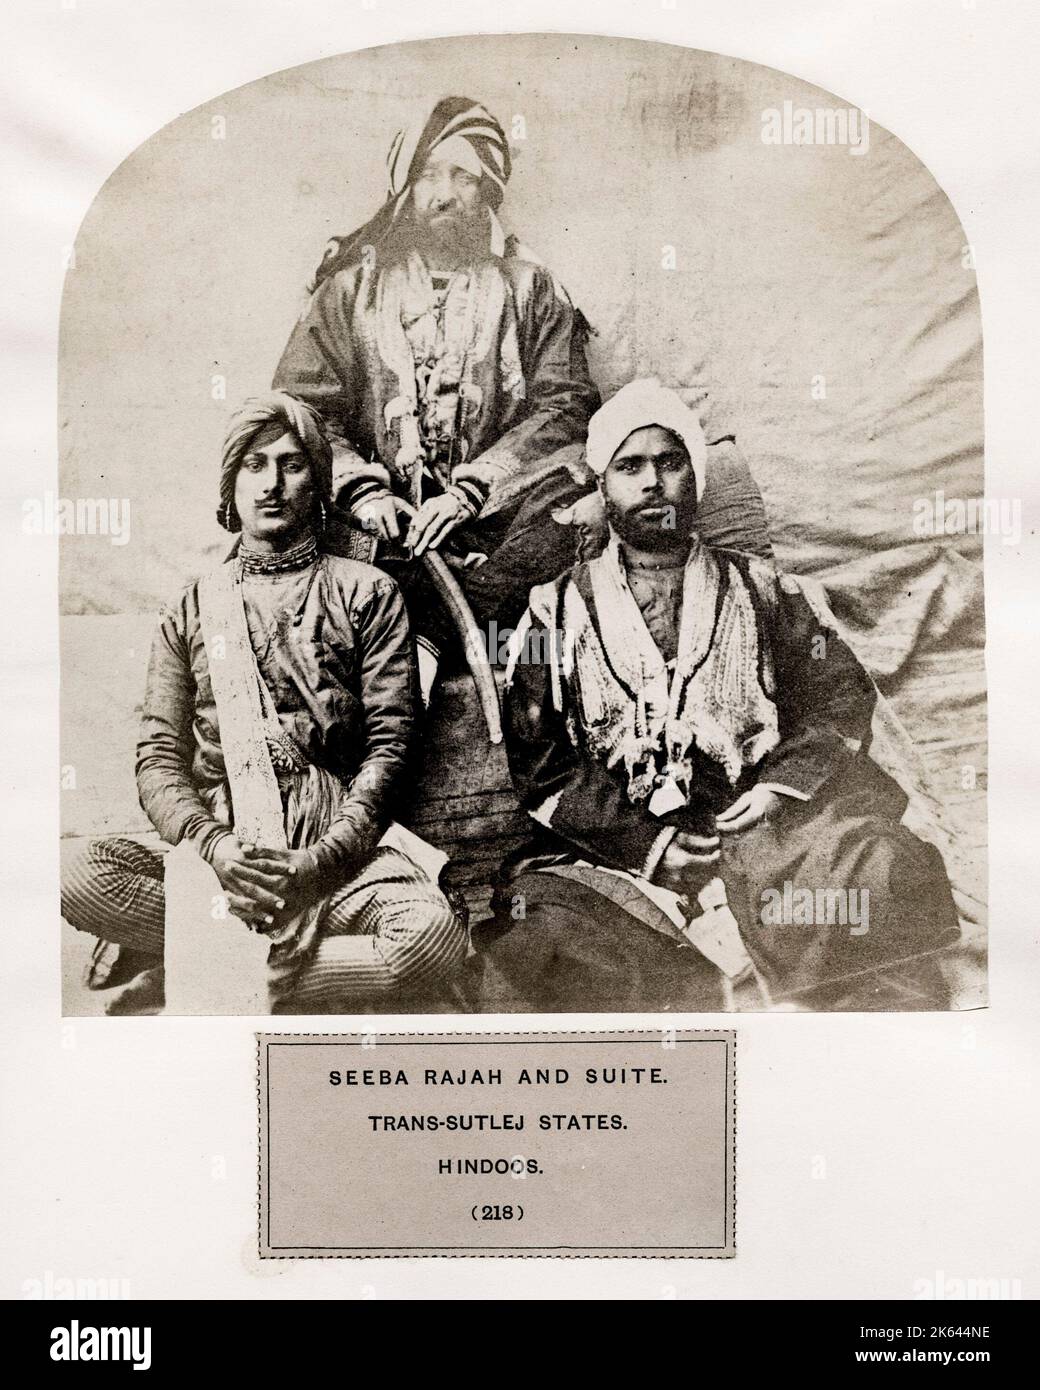 The People of India: A Series of Photographic Illustrations, with Descriptive Letterpress, of the Races and Tribes of Hindustan - published in the 1860s under order of the Viceroy, Lord Canning - Seeba Rajah and suite, Trans-Sutlej States, Hindoos. Raja, Hindu. Stock Photo